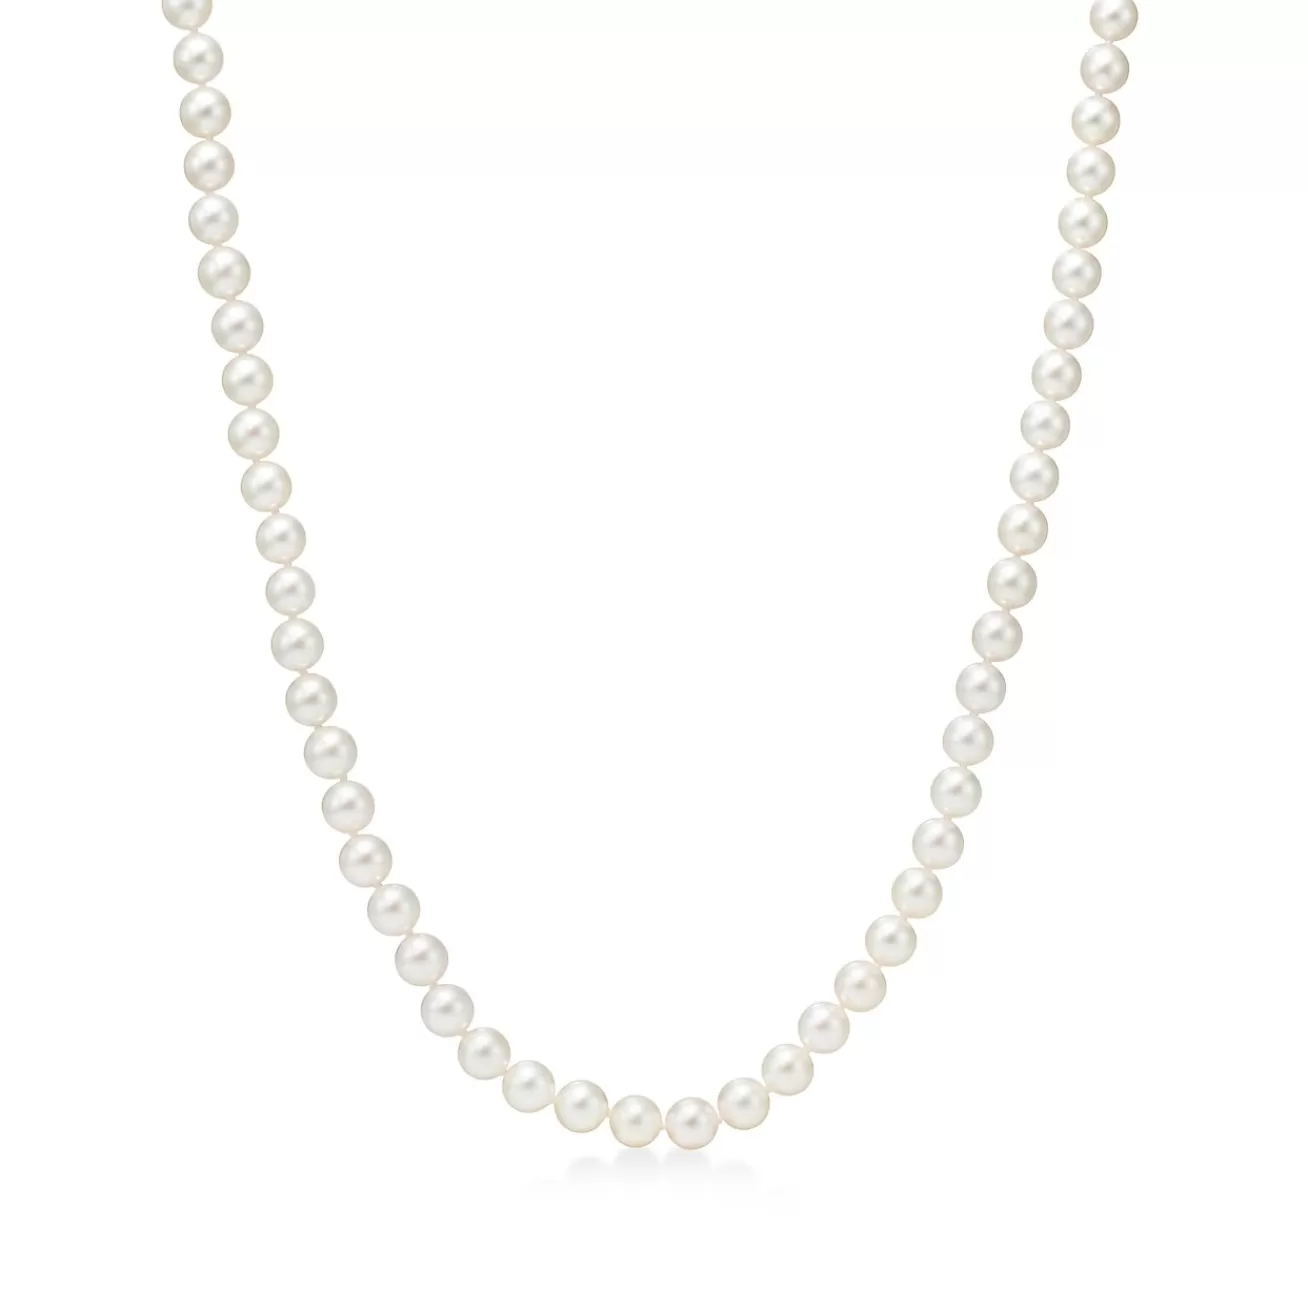 Tiffany & Co. Tiffany Essential Pearls necklace of Akoya pearls with an 18k white gold clasp. | ^ Necklaces & Pendants | Pearl Jewelry